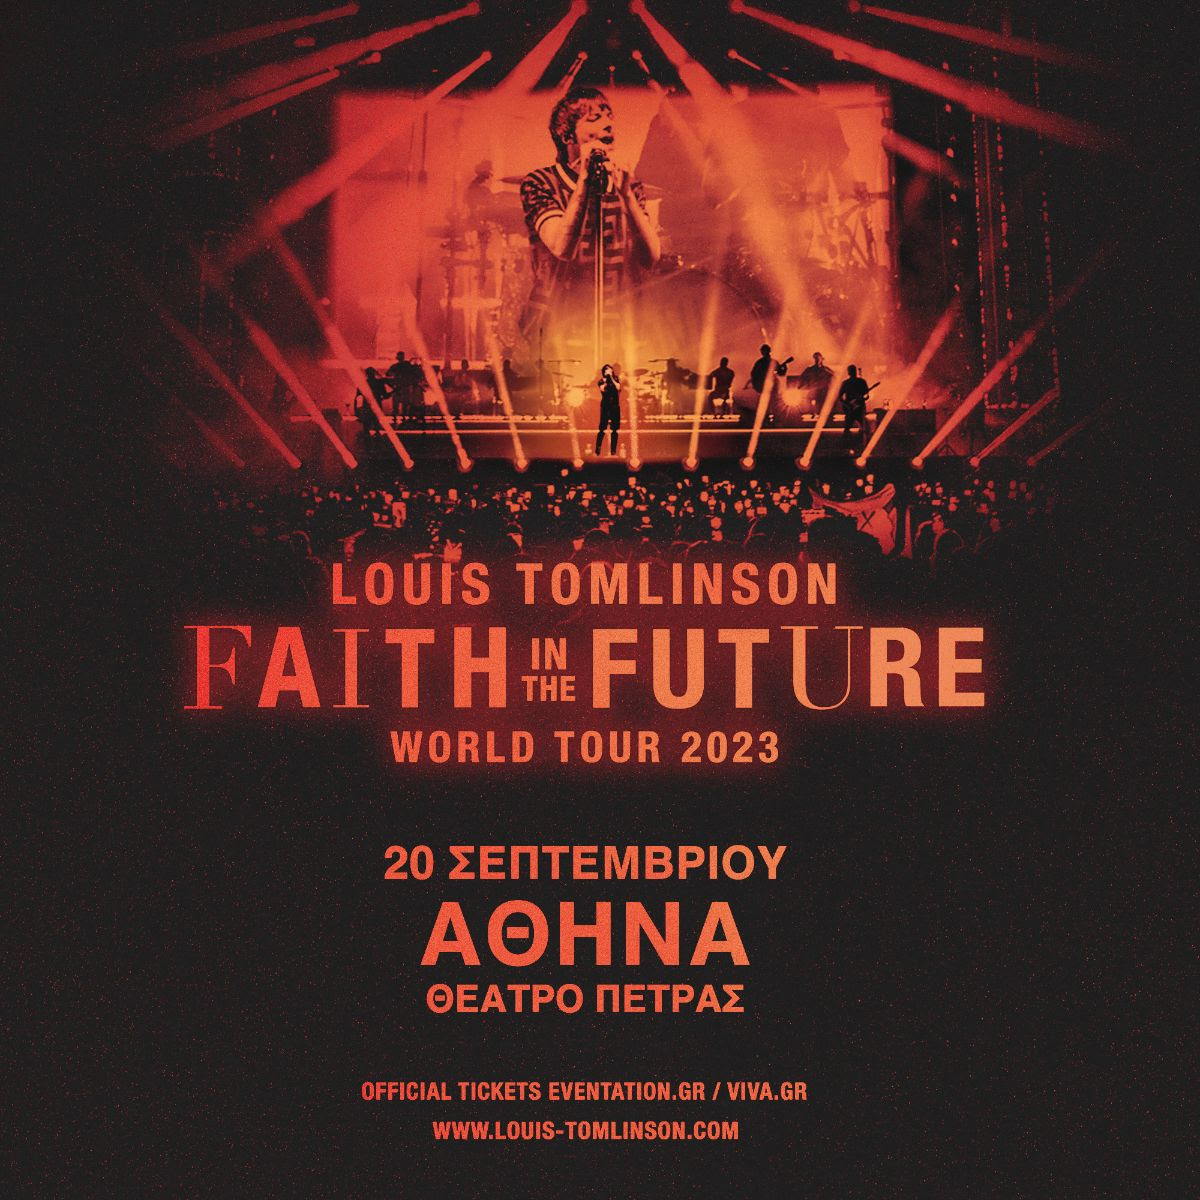 Louis Tomlinson live in Athens